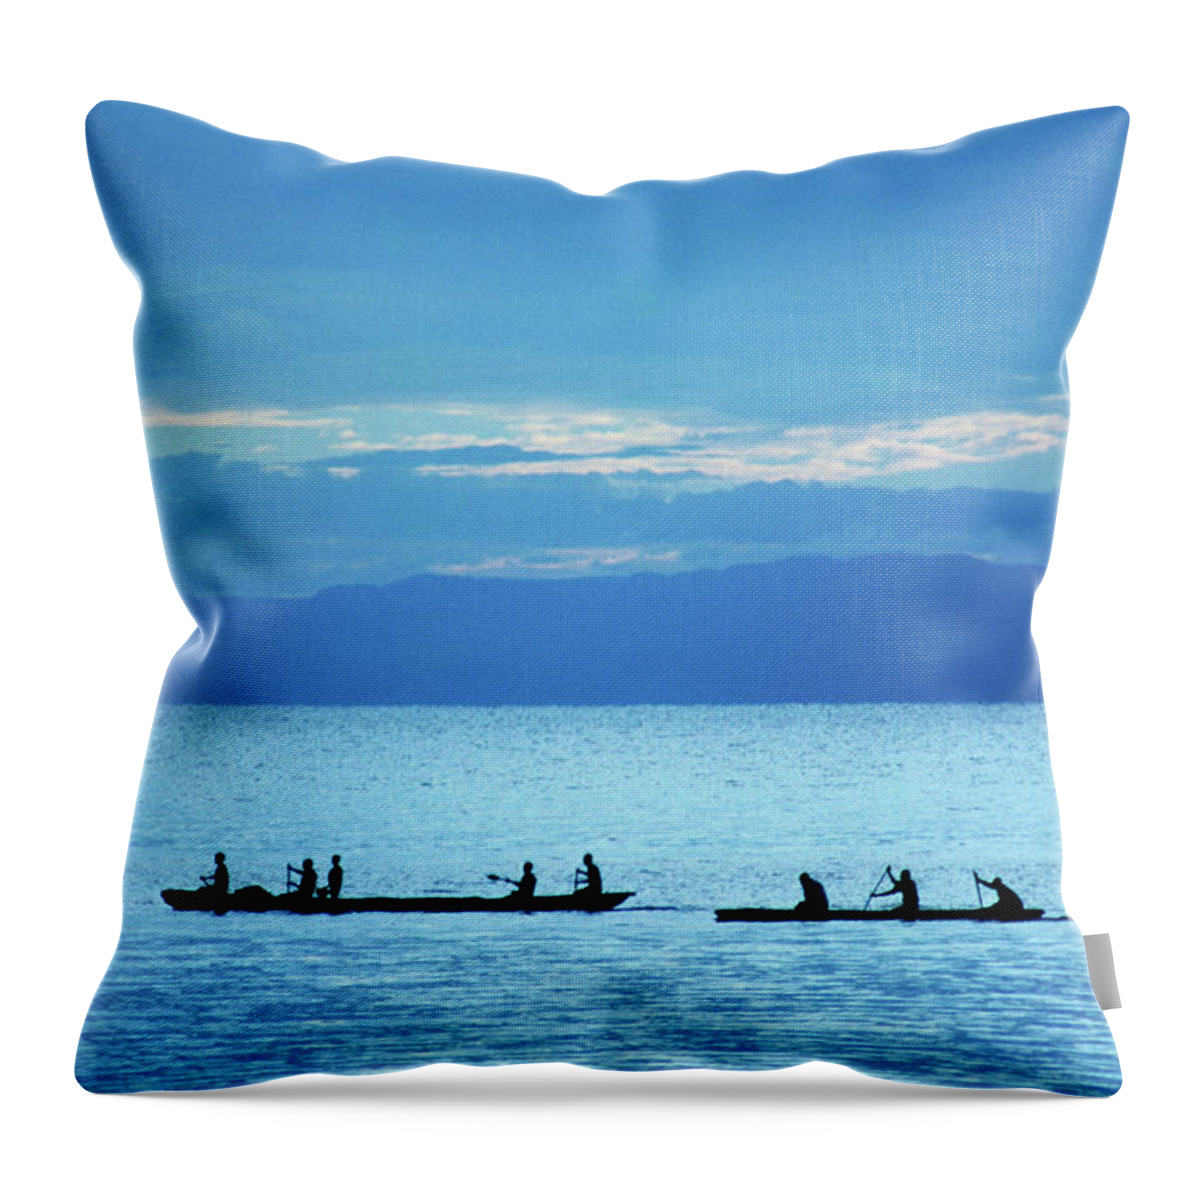 Scenics Throw Pillow featuring the photograph Fishermen by David Cayless